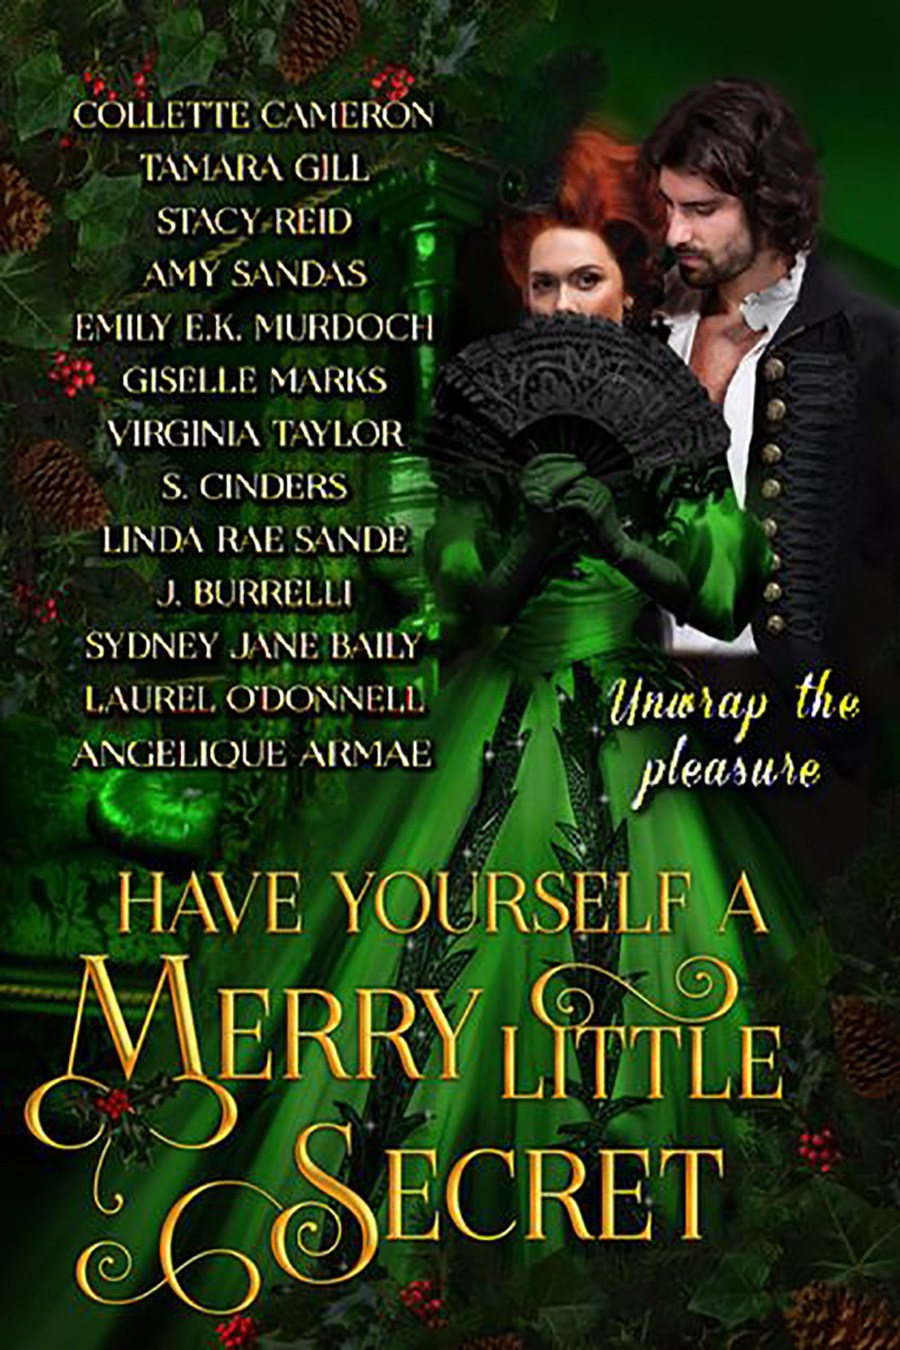 Have Yourself a Merry Little Secret is FREE!